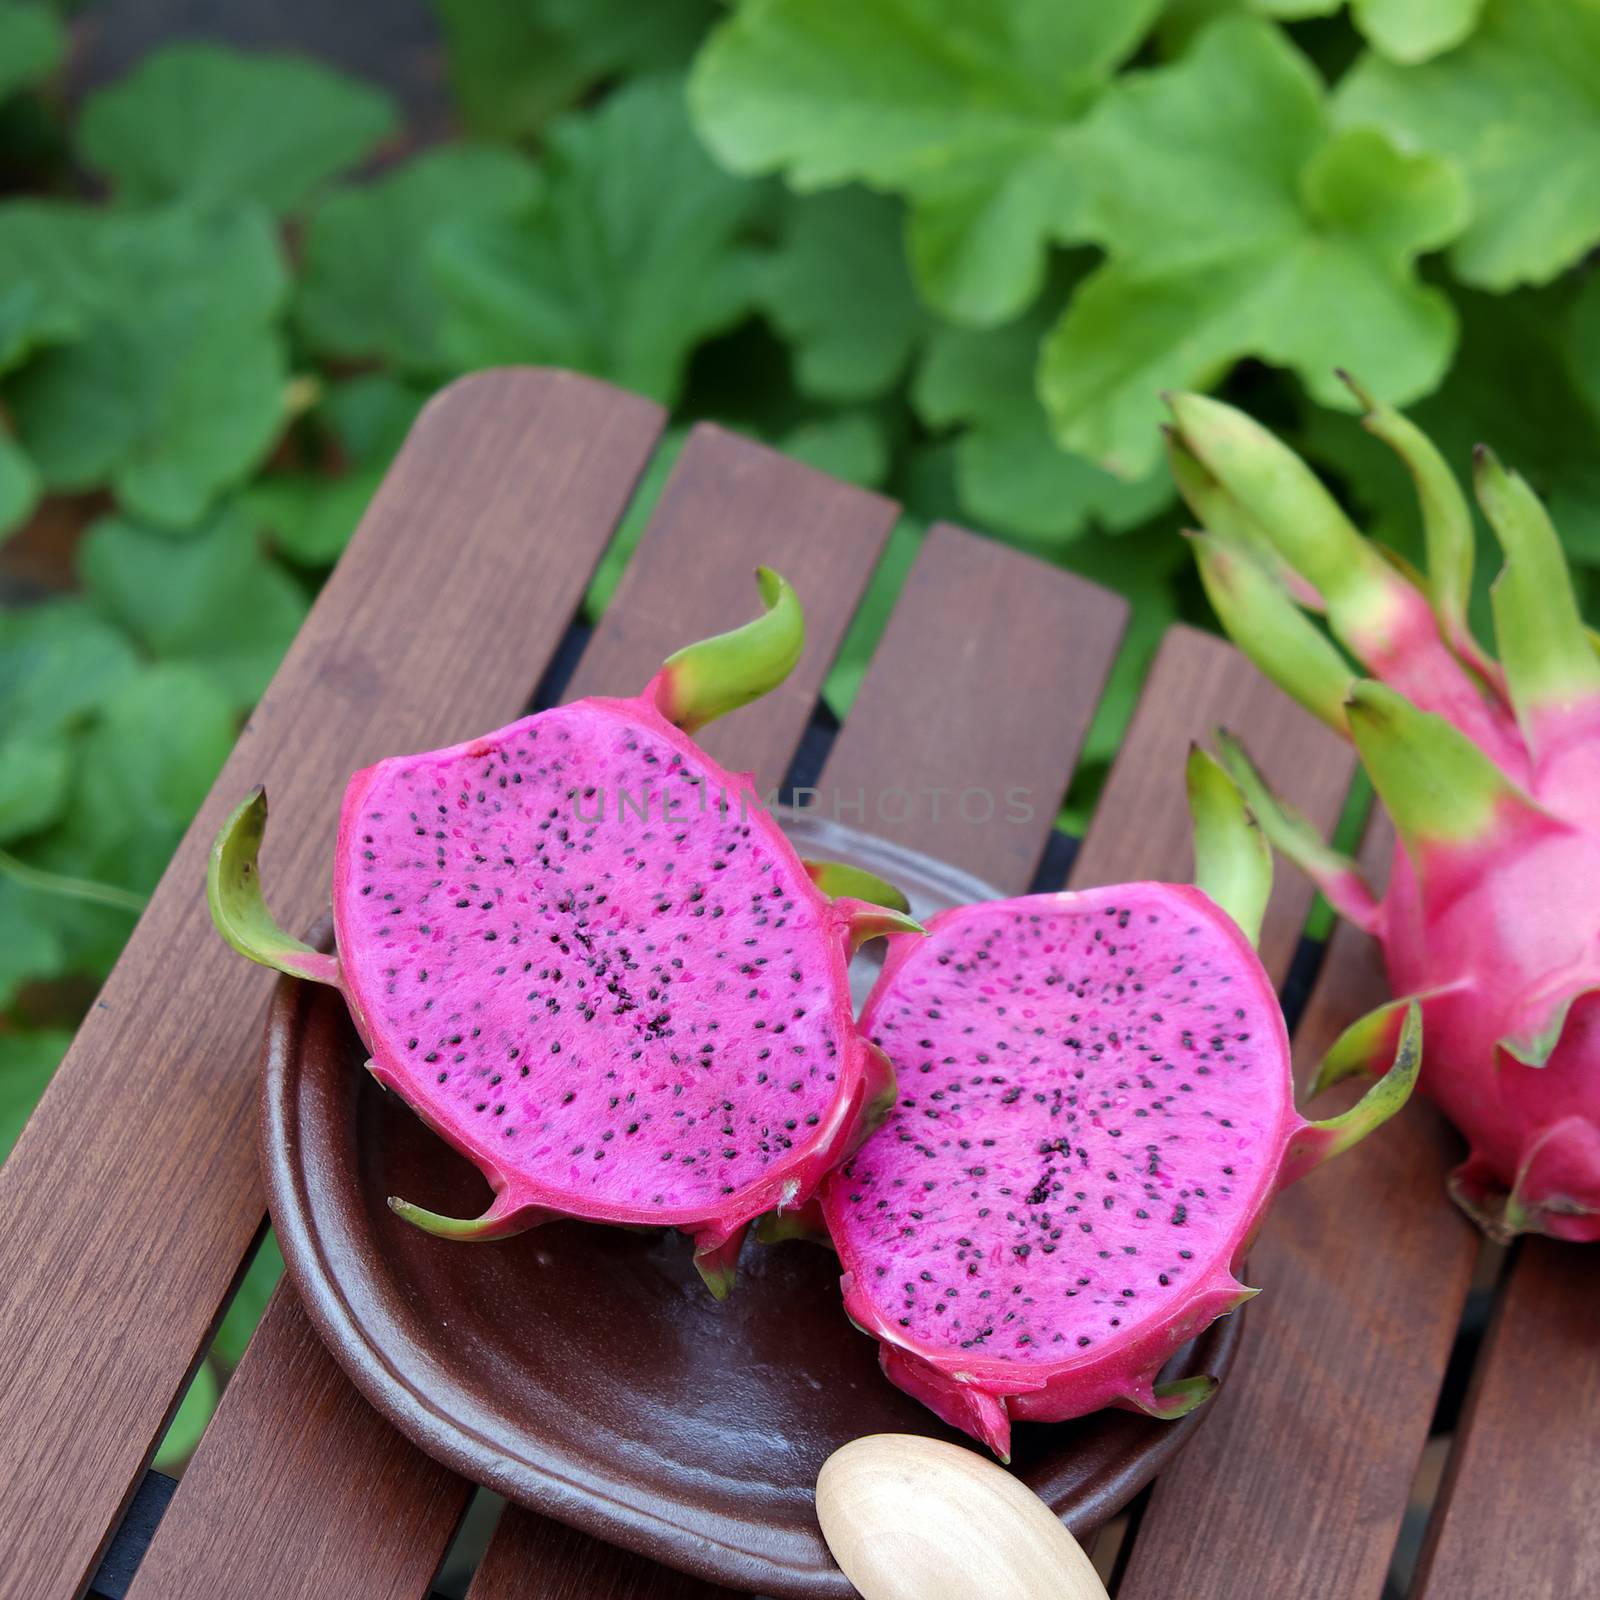 dragon fruit, tropical fruits, Vietnam agriculture by xuanhuongho